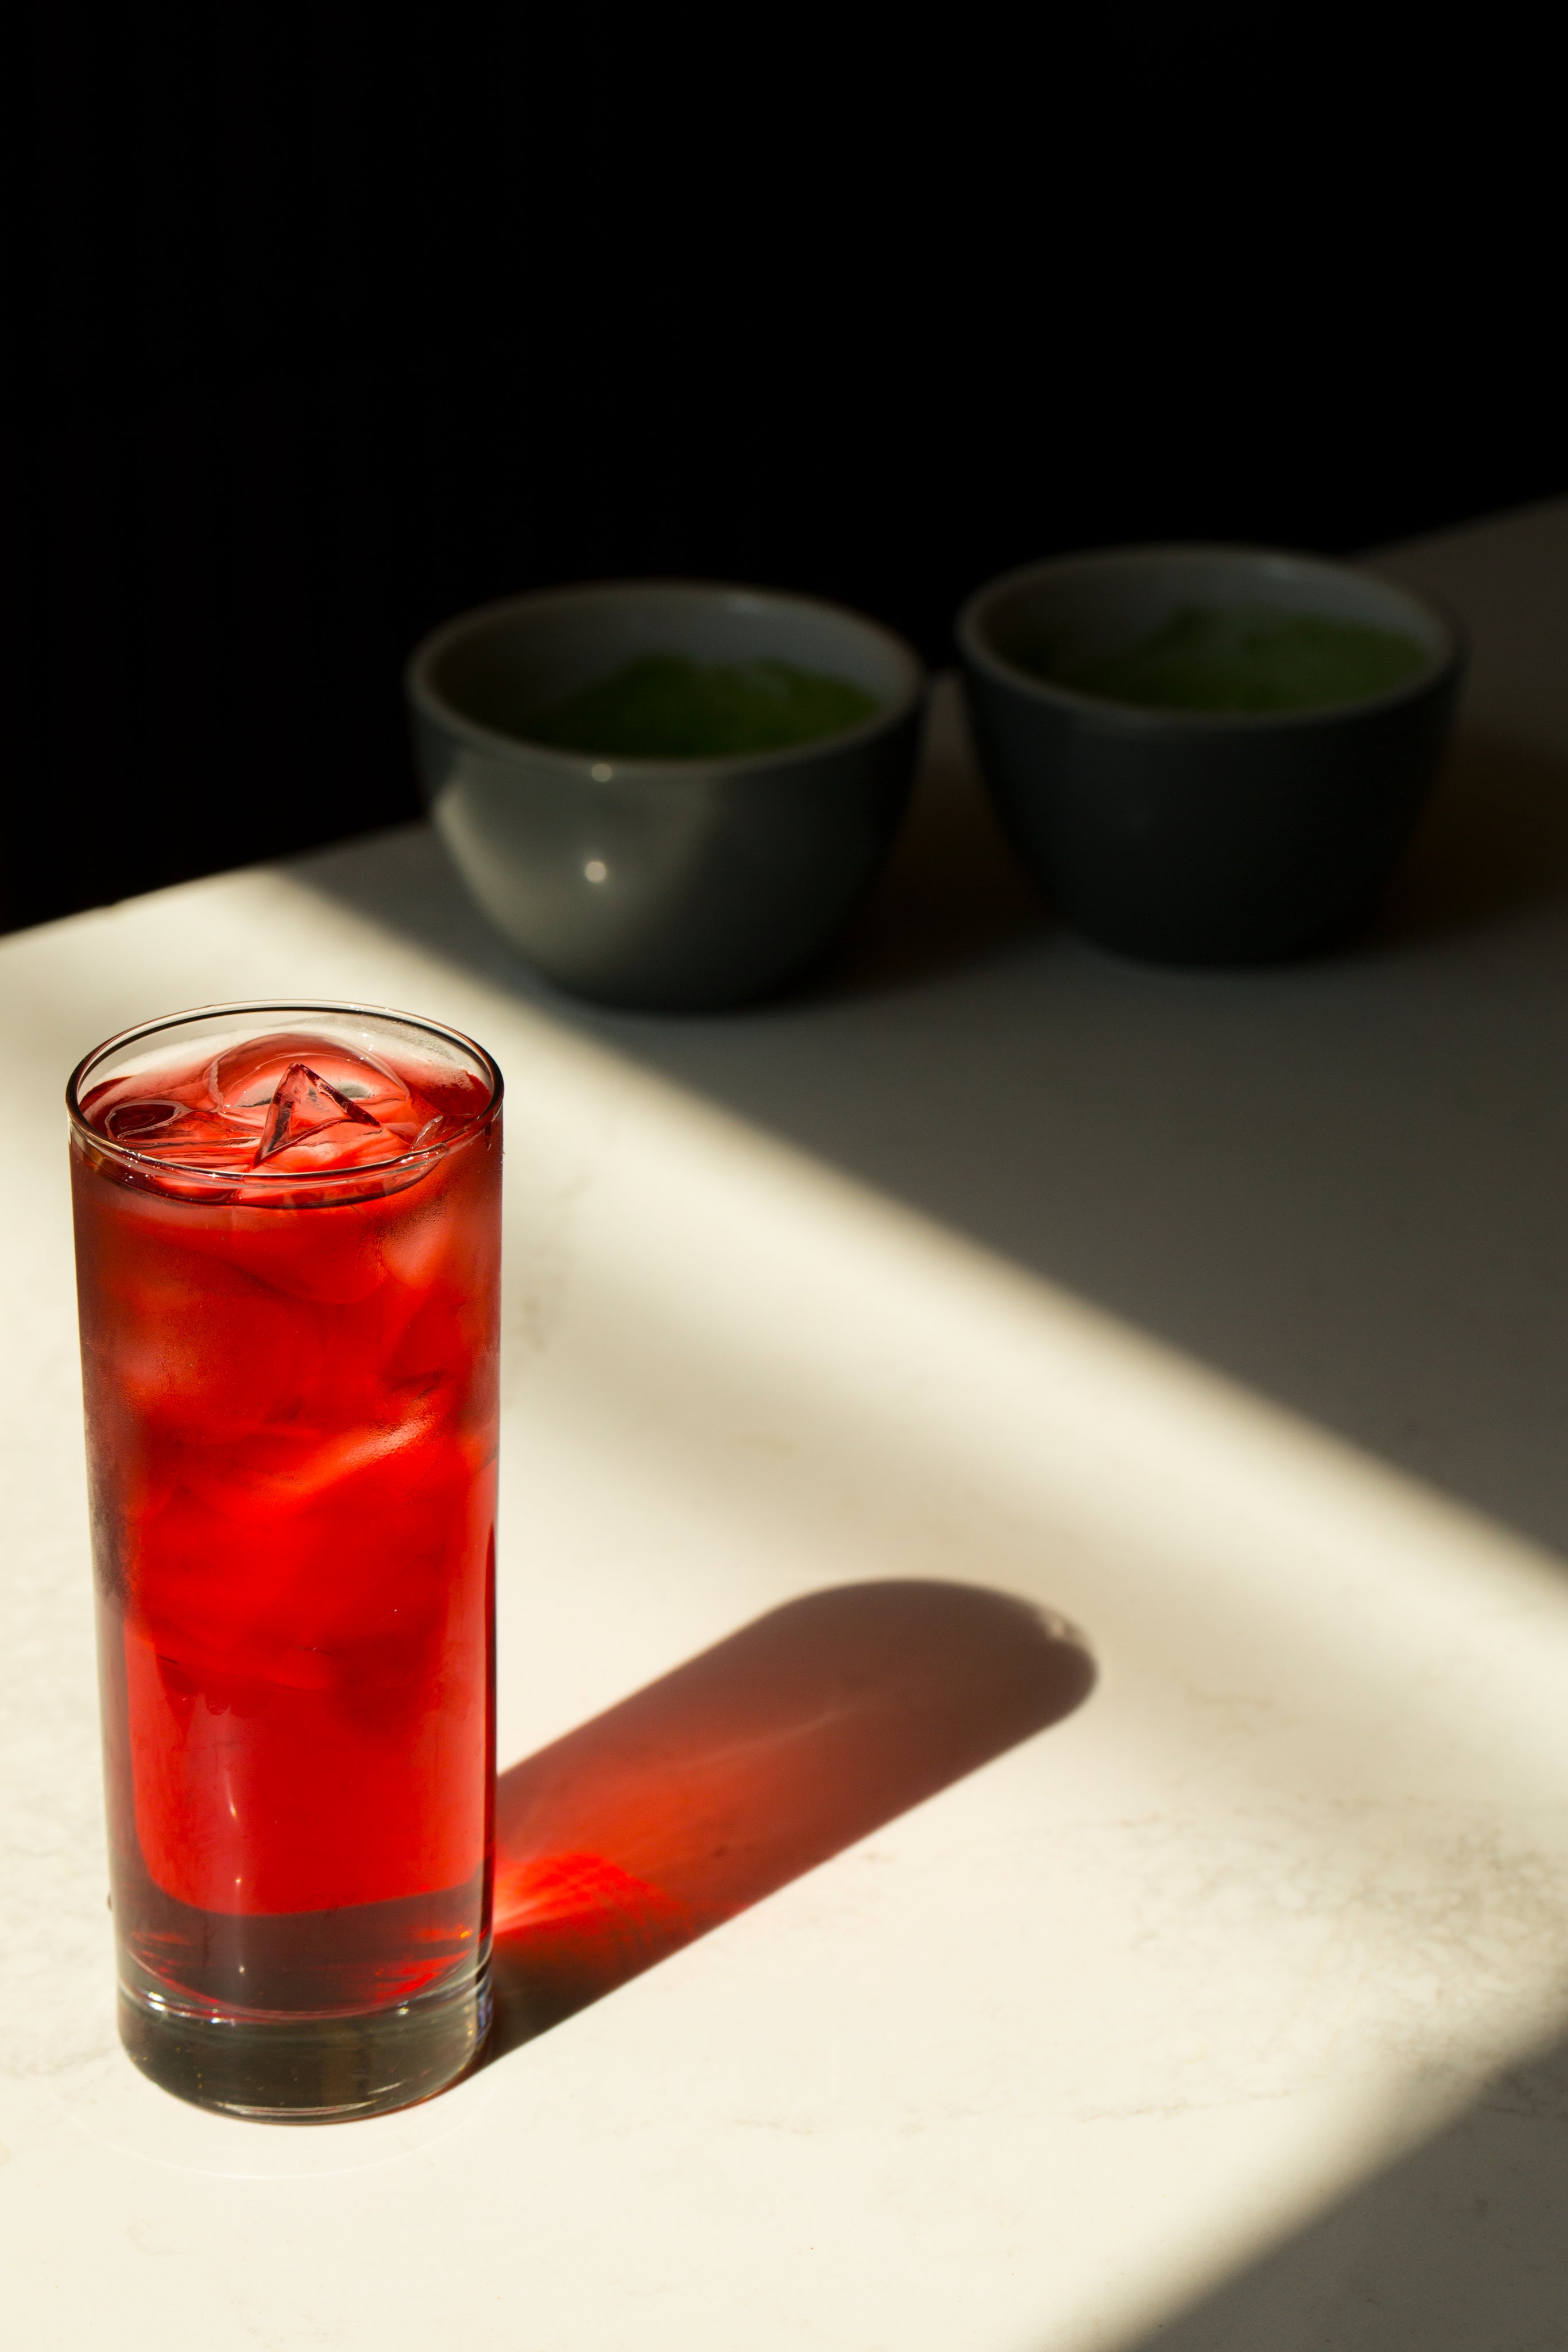 glass-with-iced-red-beverage-reflects-on-a-white-table.jpg